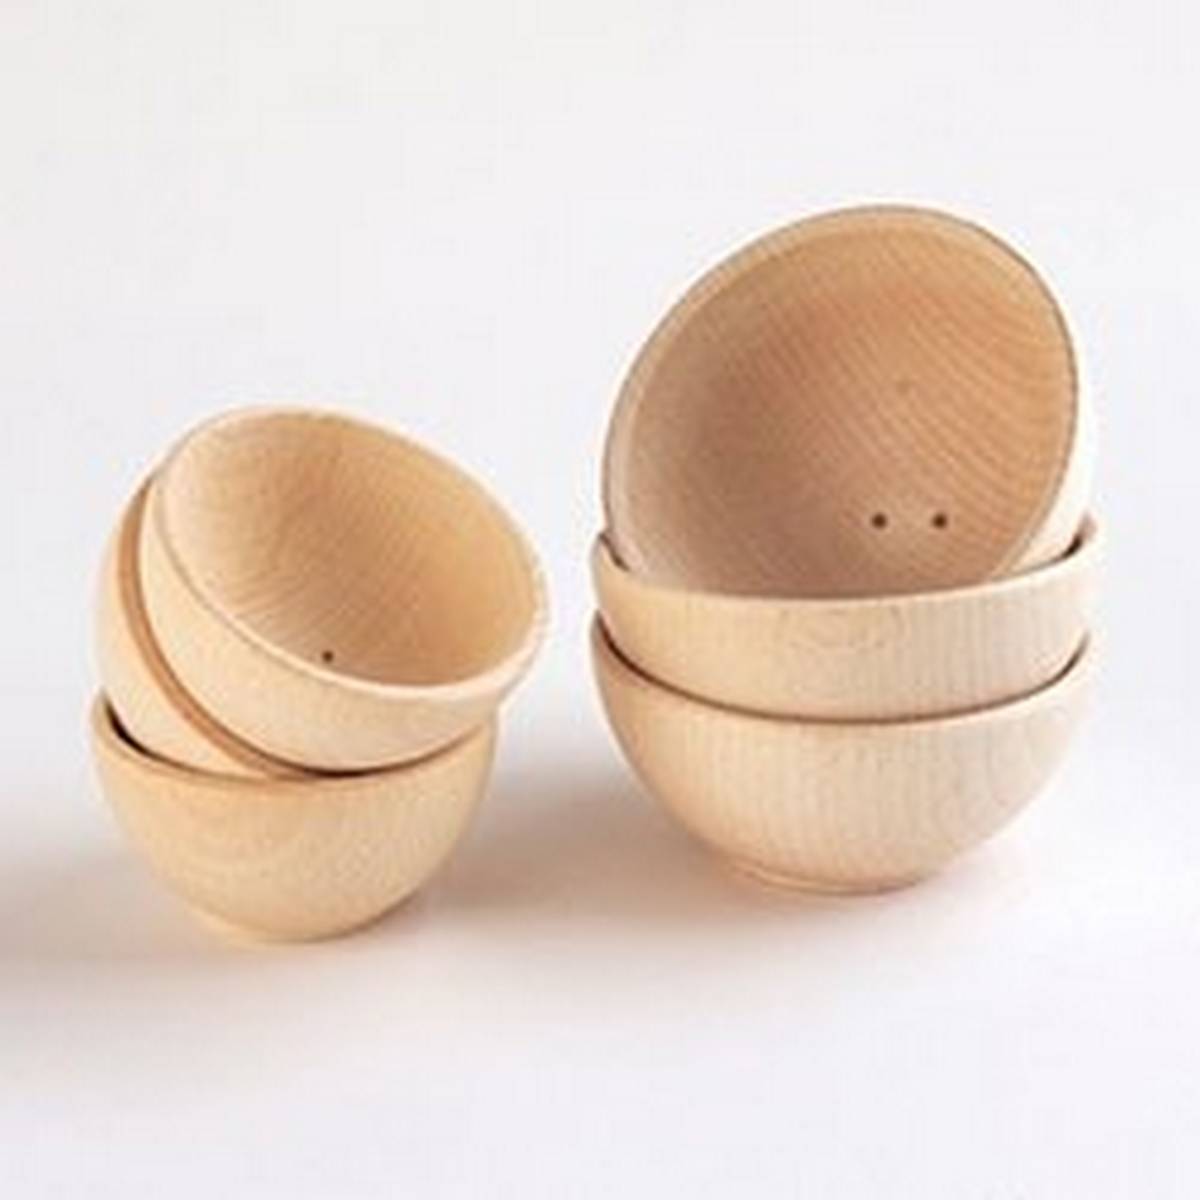 Wooden Bowls 70mm - pack of 3